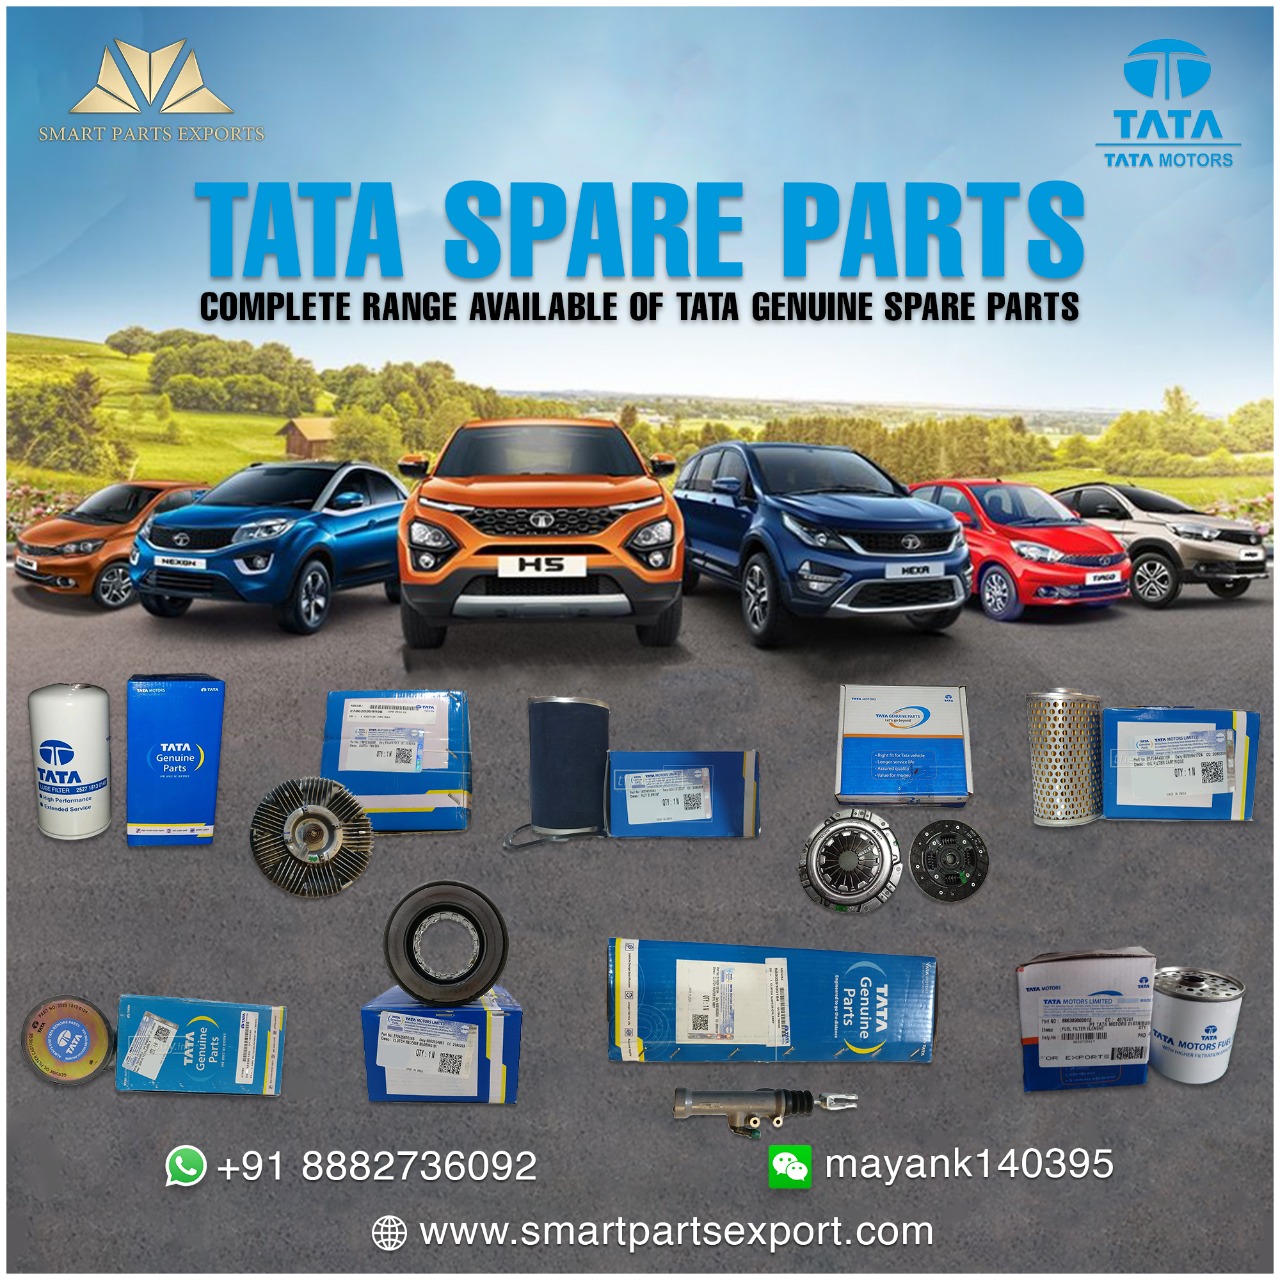 TATA Genuine Accessories and CAR Parts | Indian Exporter